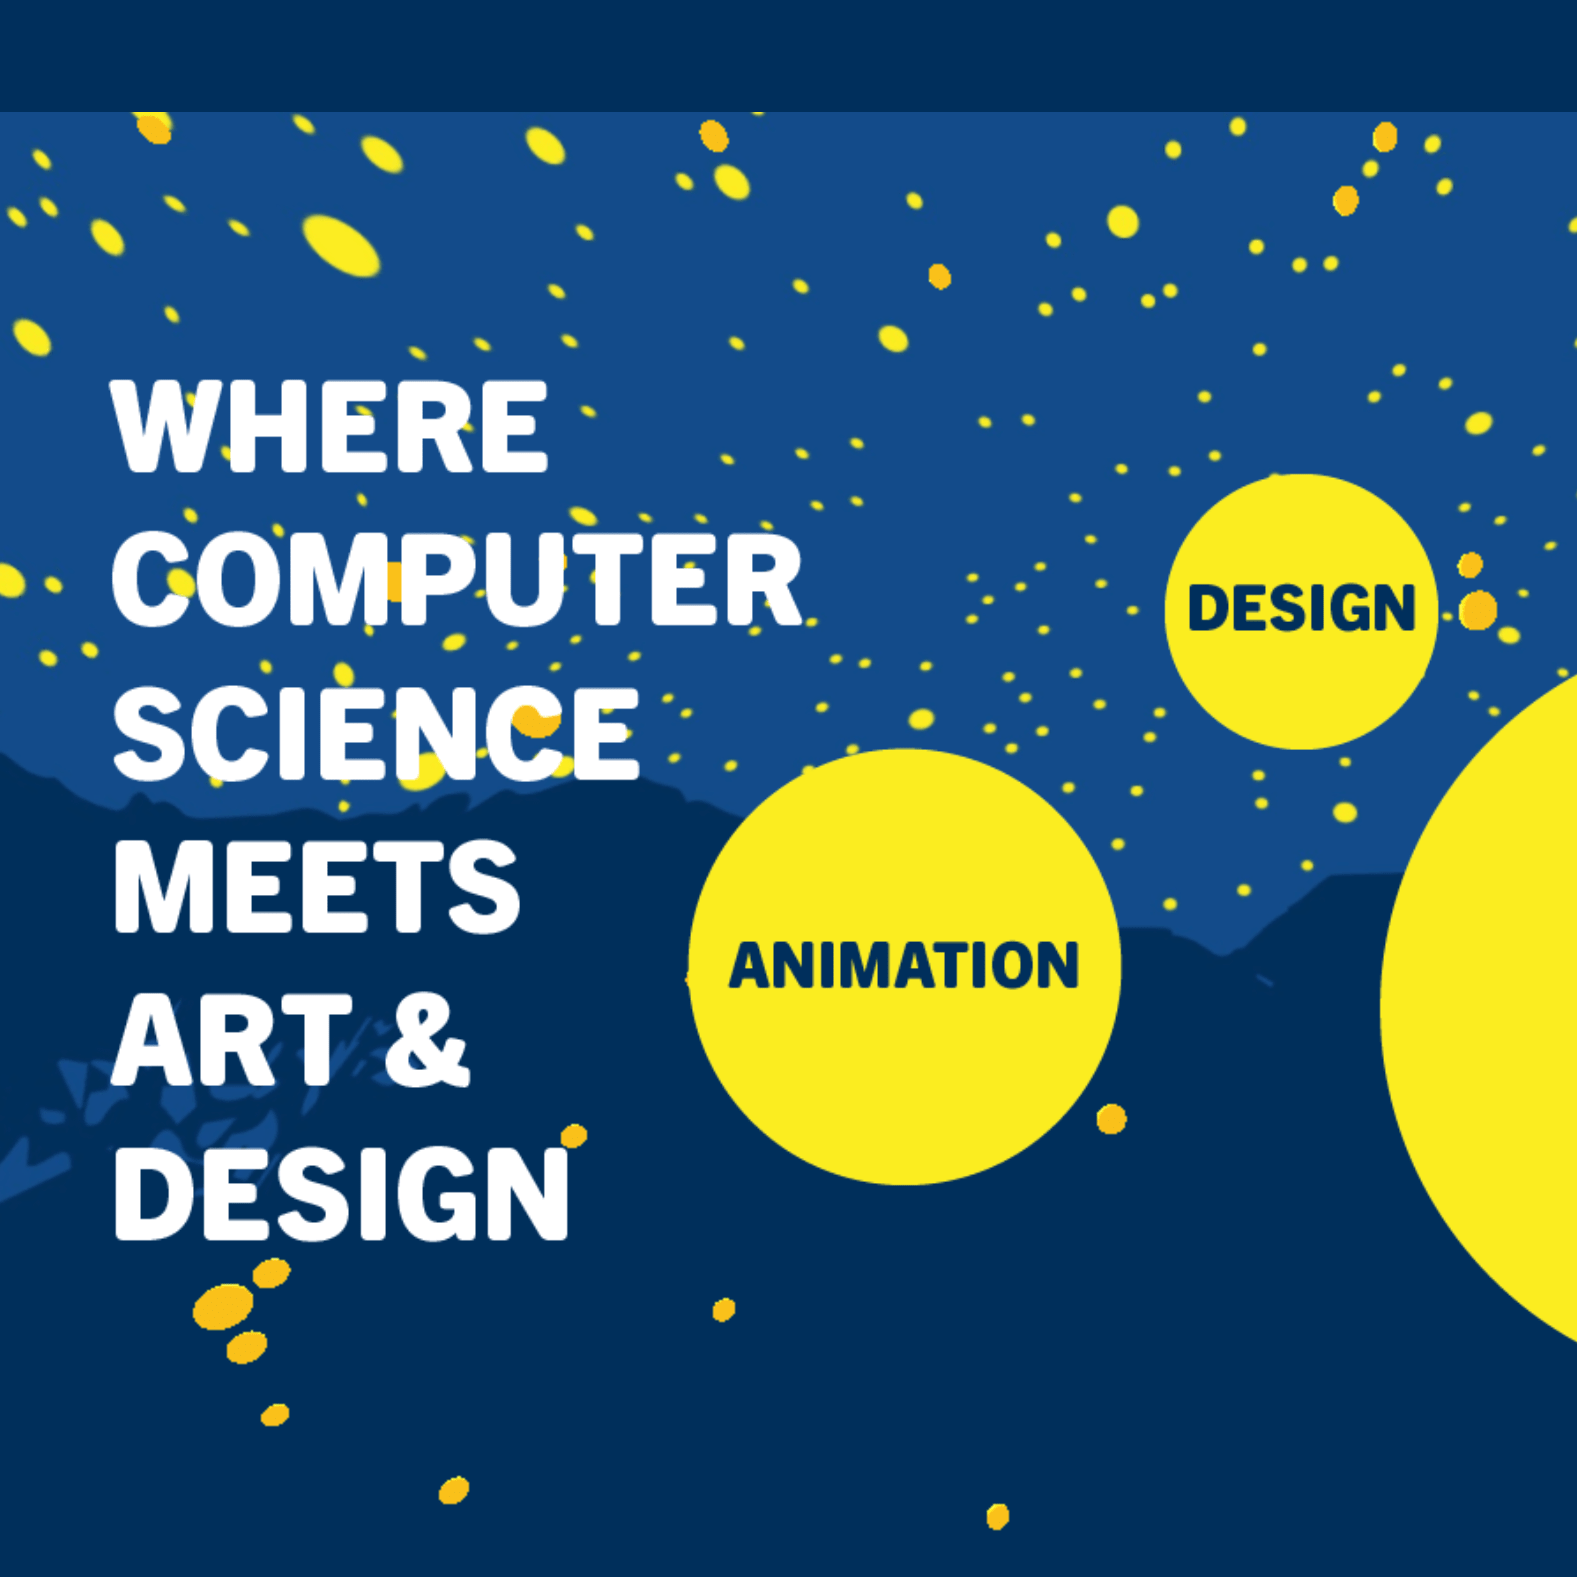 Where Computer Science Meets Art and Design